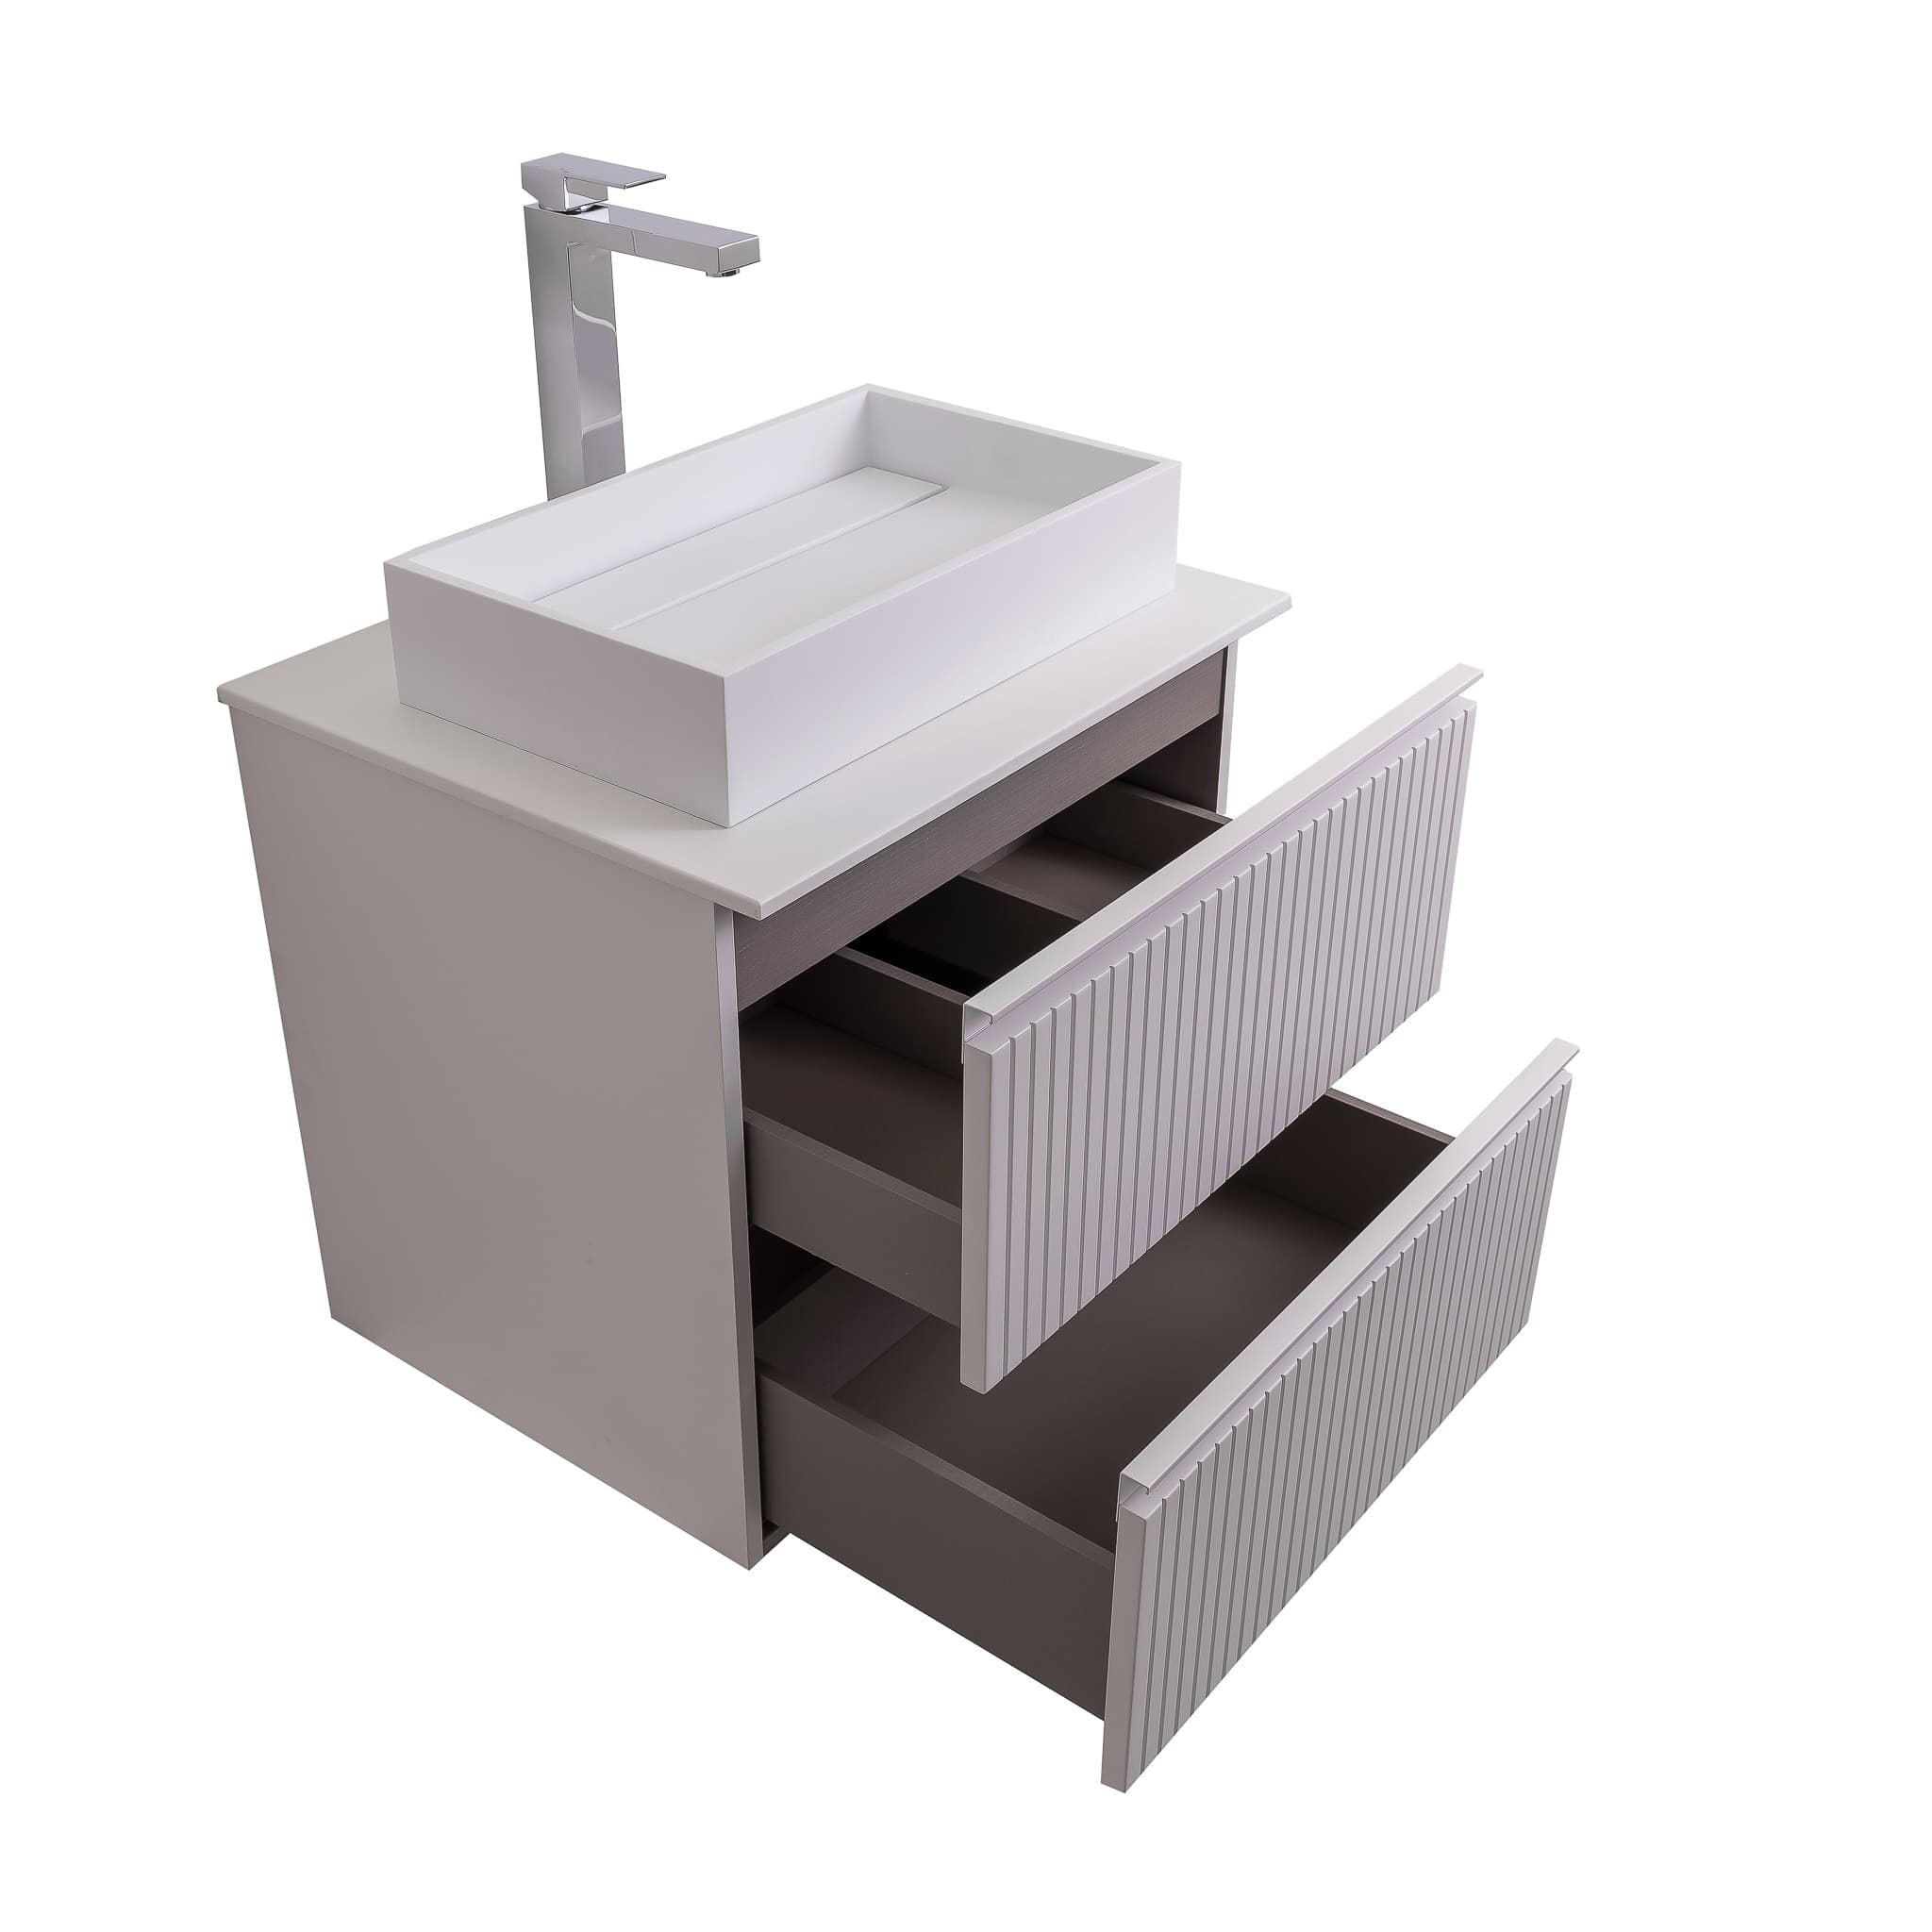 Ares 23.5 Matte White Cabinet, Solid Surface Flat White Counter And Infinity Square Solid Surface White Basin 1329, Wall Mounted Modern Vanity Set